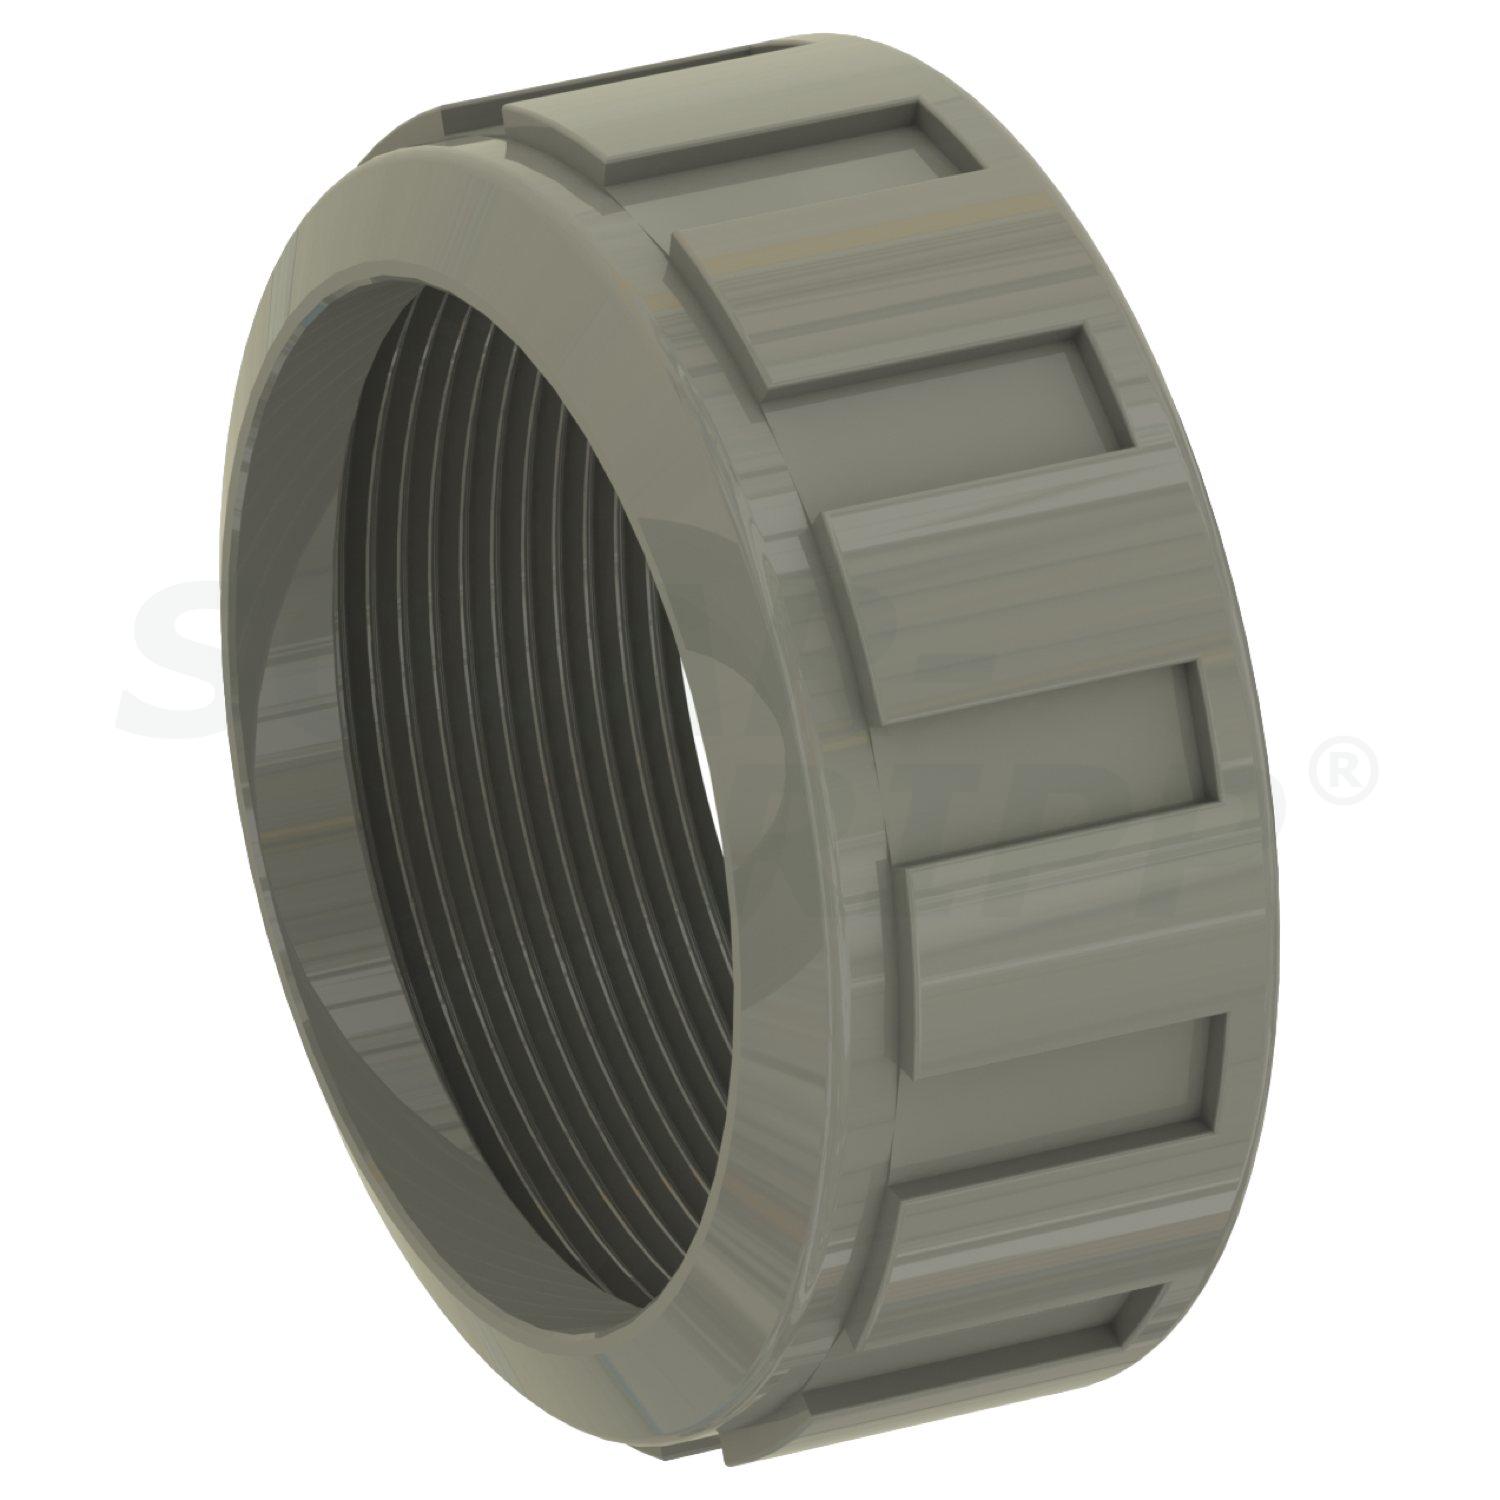 Ring nut for actuated 3 way valve 63mm